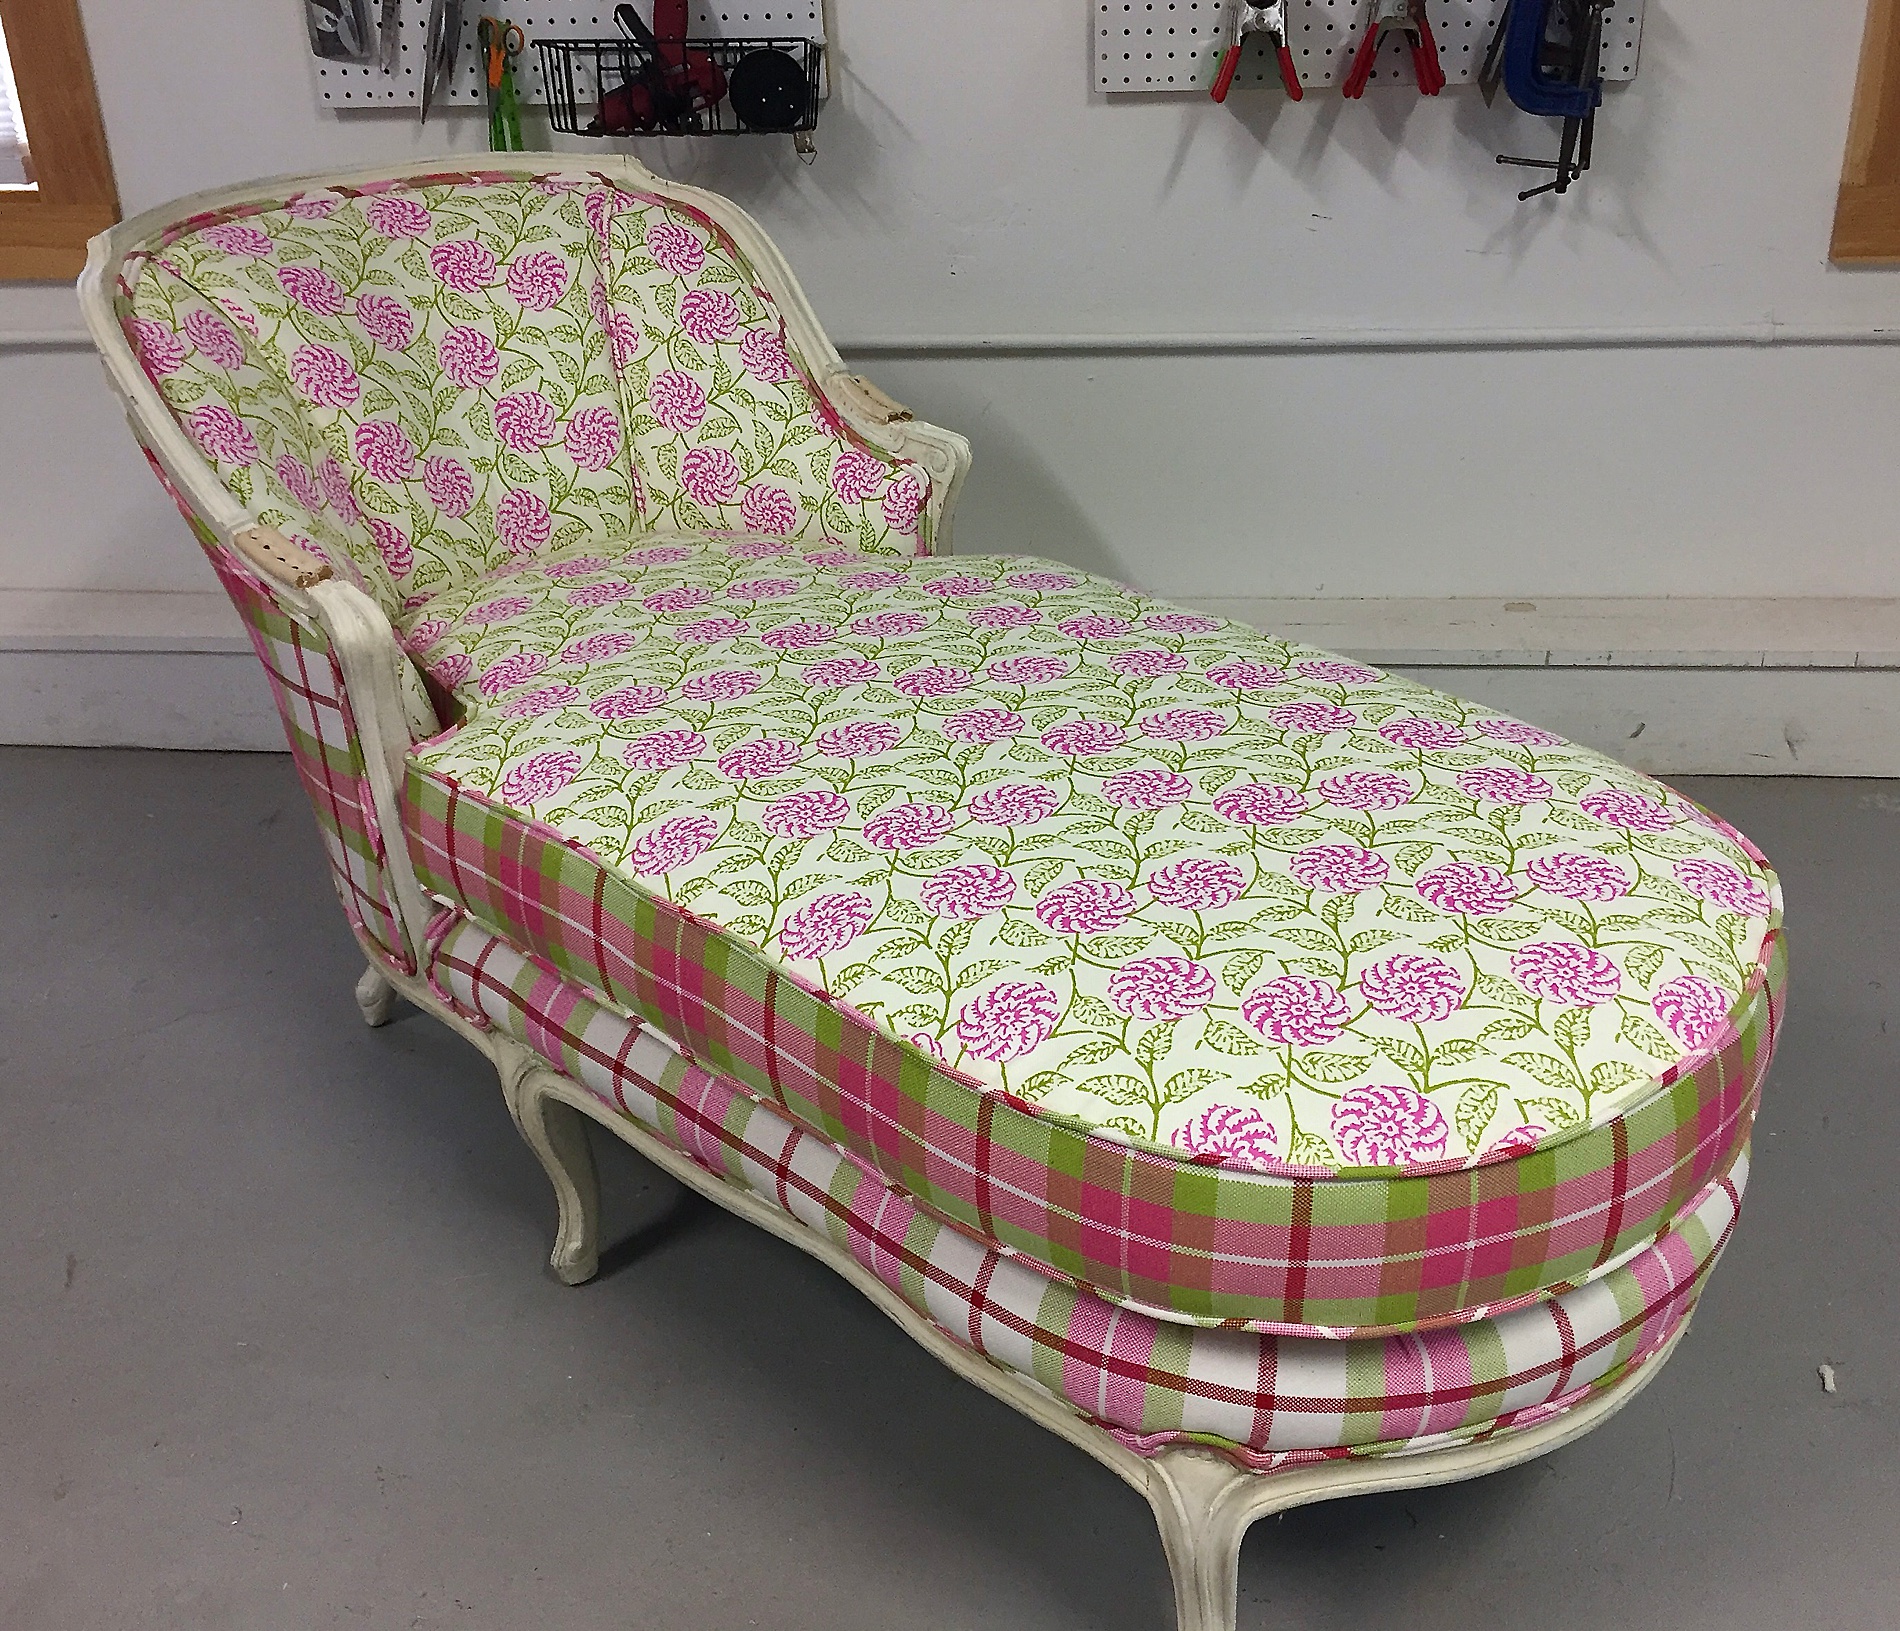 finished reupholstered chaise lounger